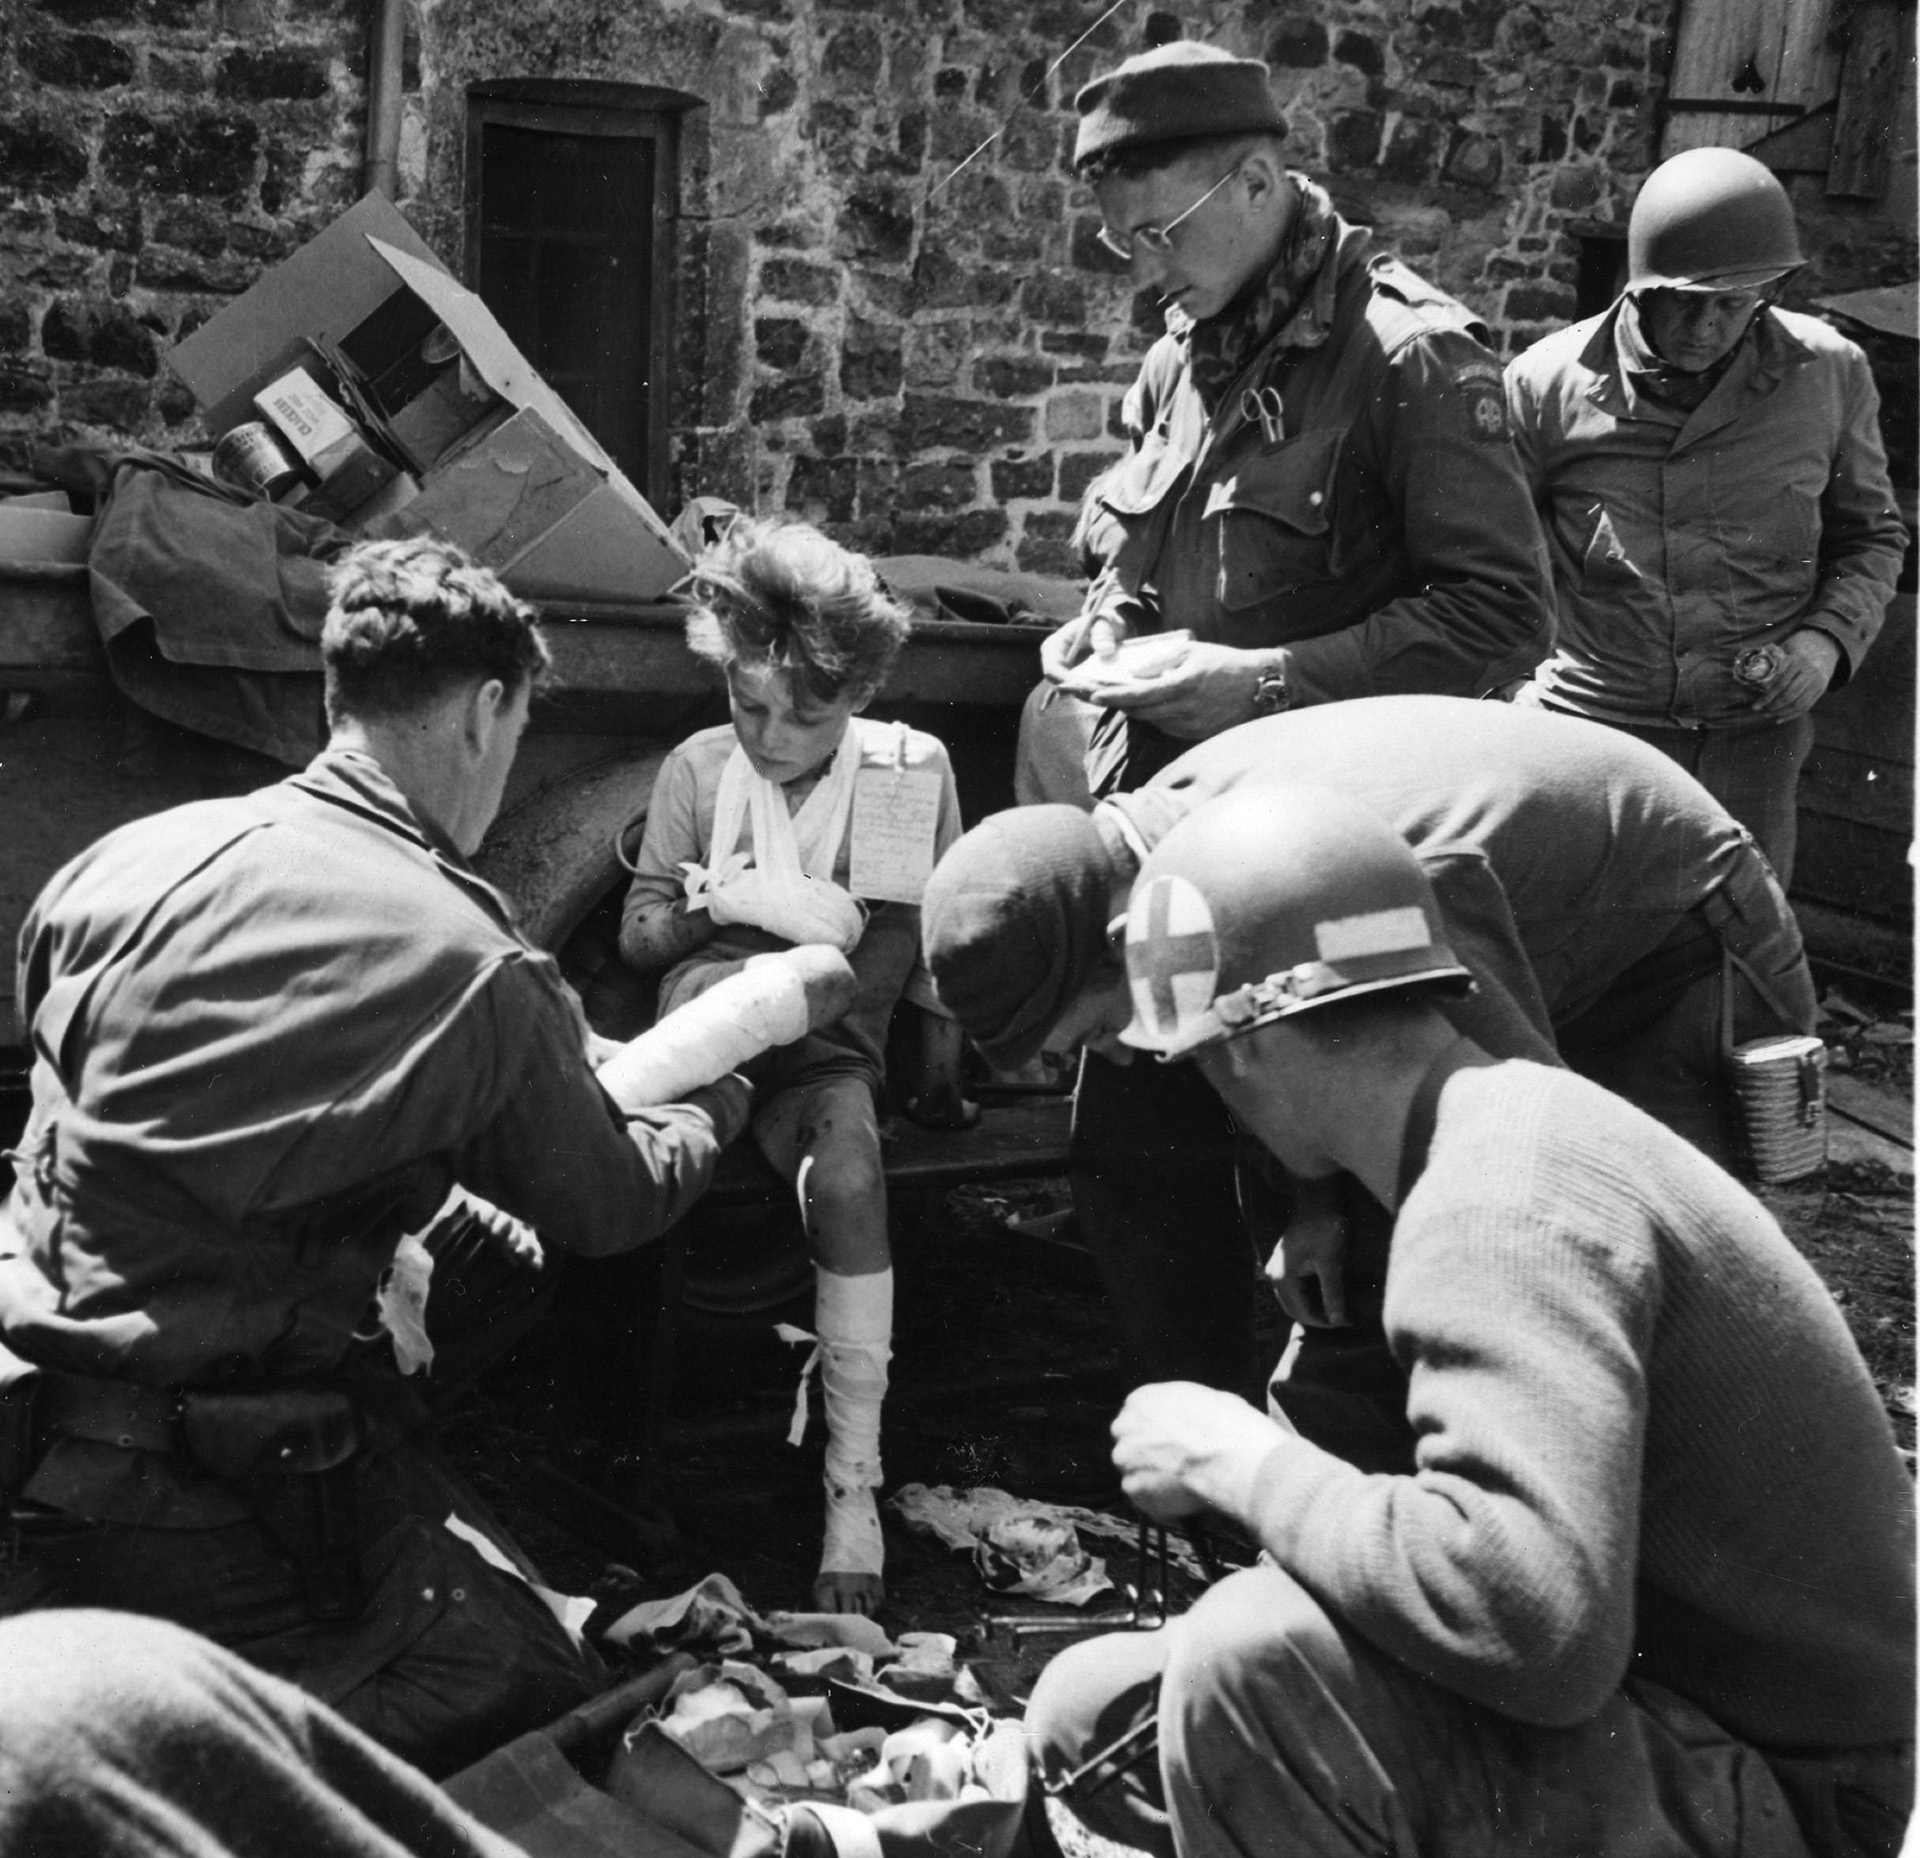 Ten-year-old Jean Louis receives first aid from American airborne medics after the fighting at St. Sauveur.